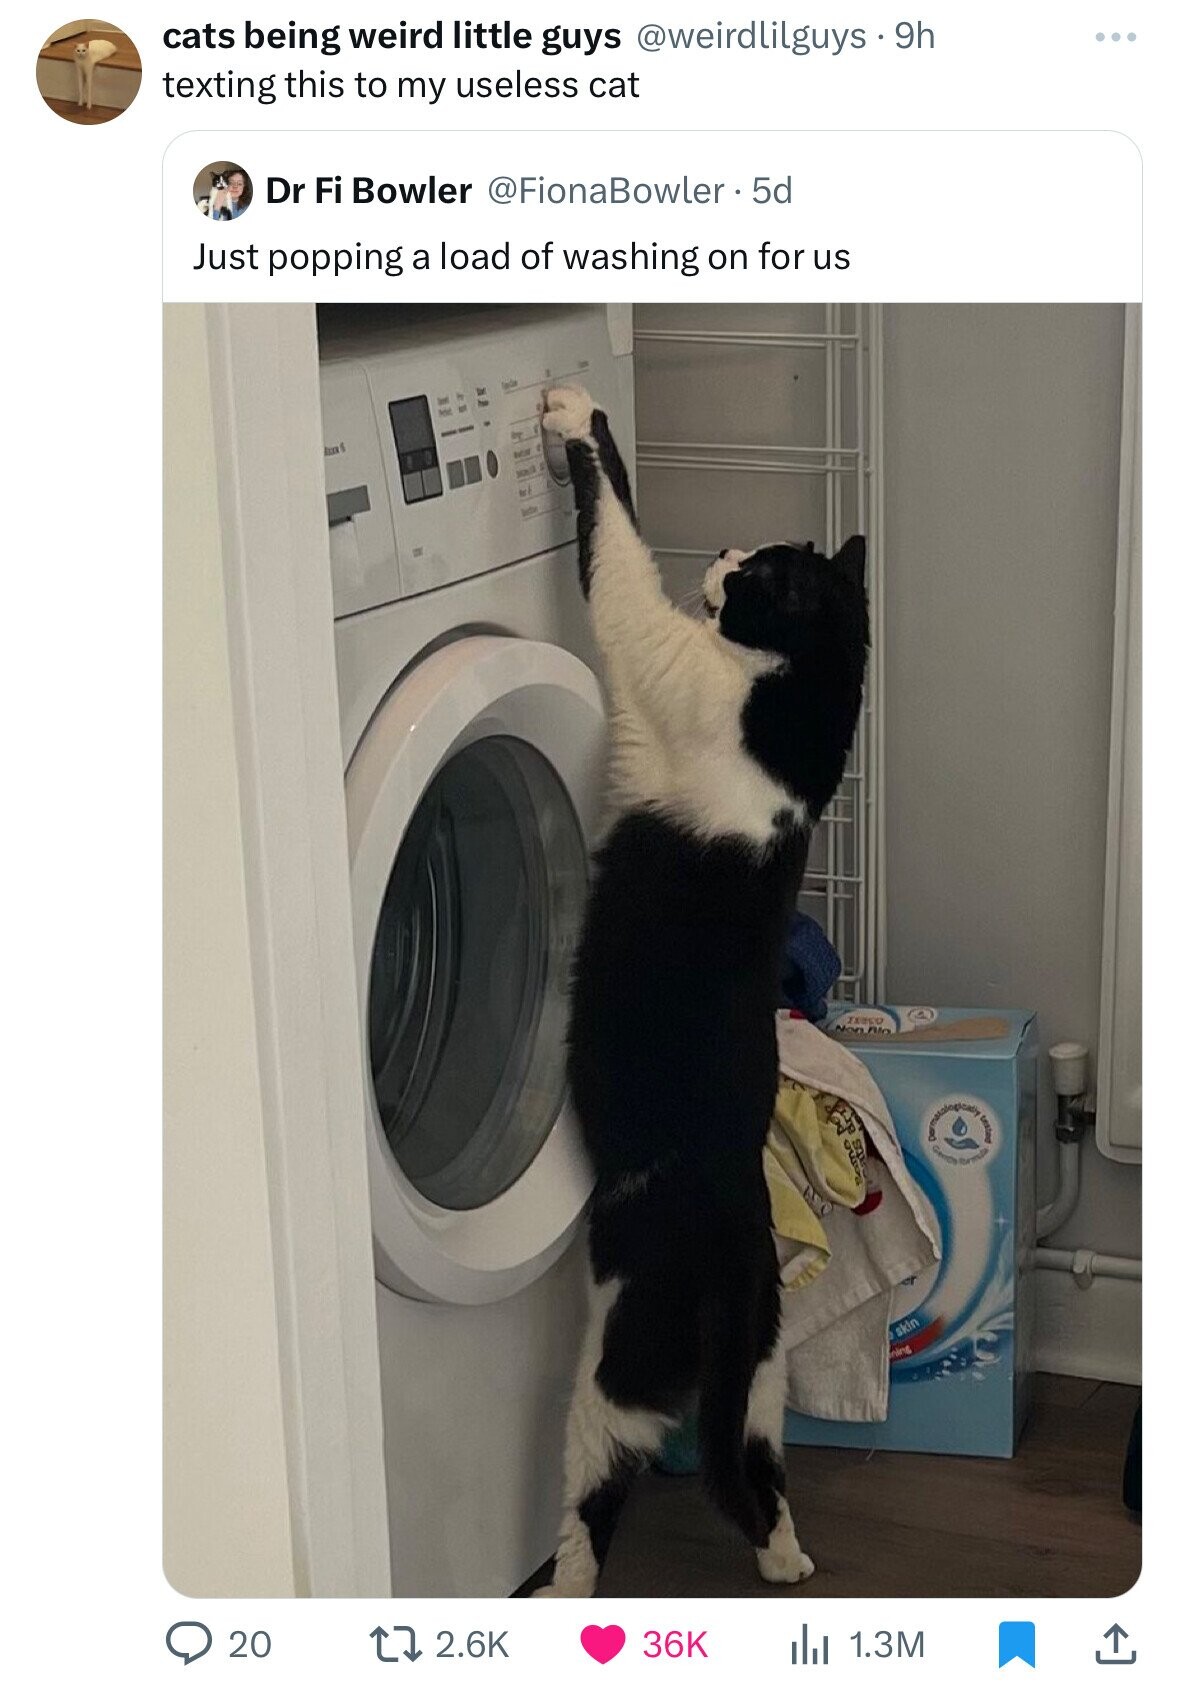 cats being weird little guys @weirdlilguys.9h texting this to my useless cat Dr Fi Bowler @FionaBowler . 5d Just popping a load of washing on for us ZARKO Non Rio George formila skin ning 20 2.6K 36K 1.3M 